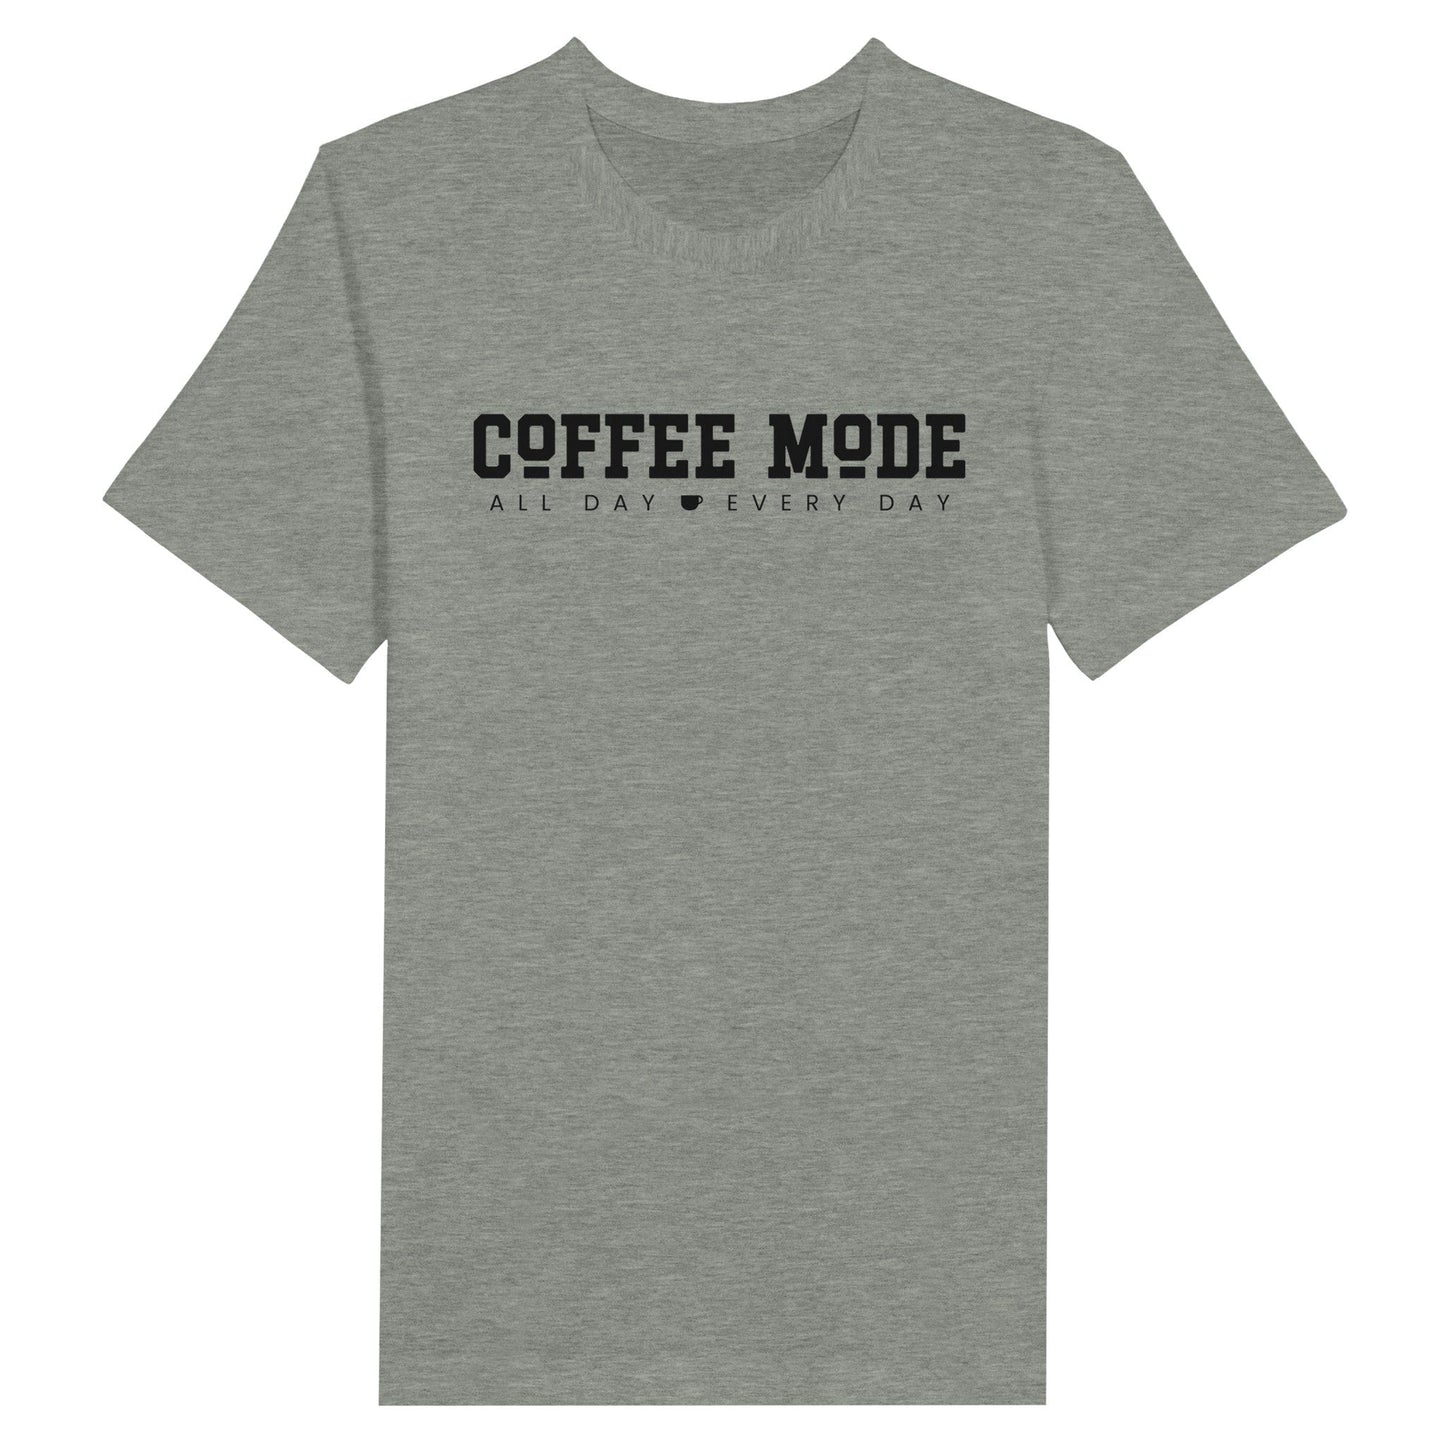 Good Bean Gifts "Coffee Mode" - Unisex Crewneck T-shirt Athletic Heather / S